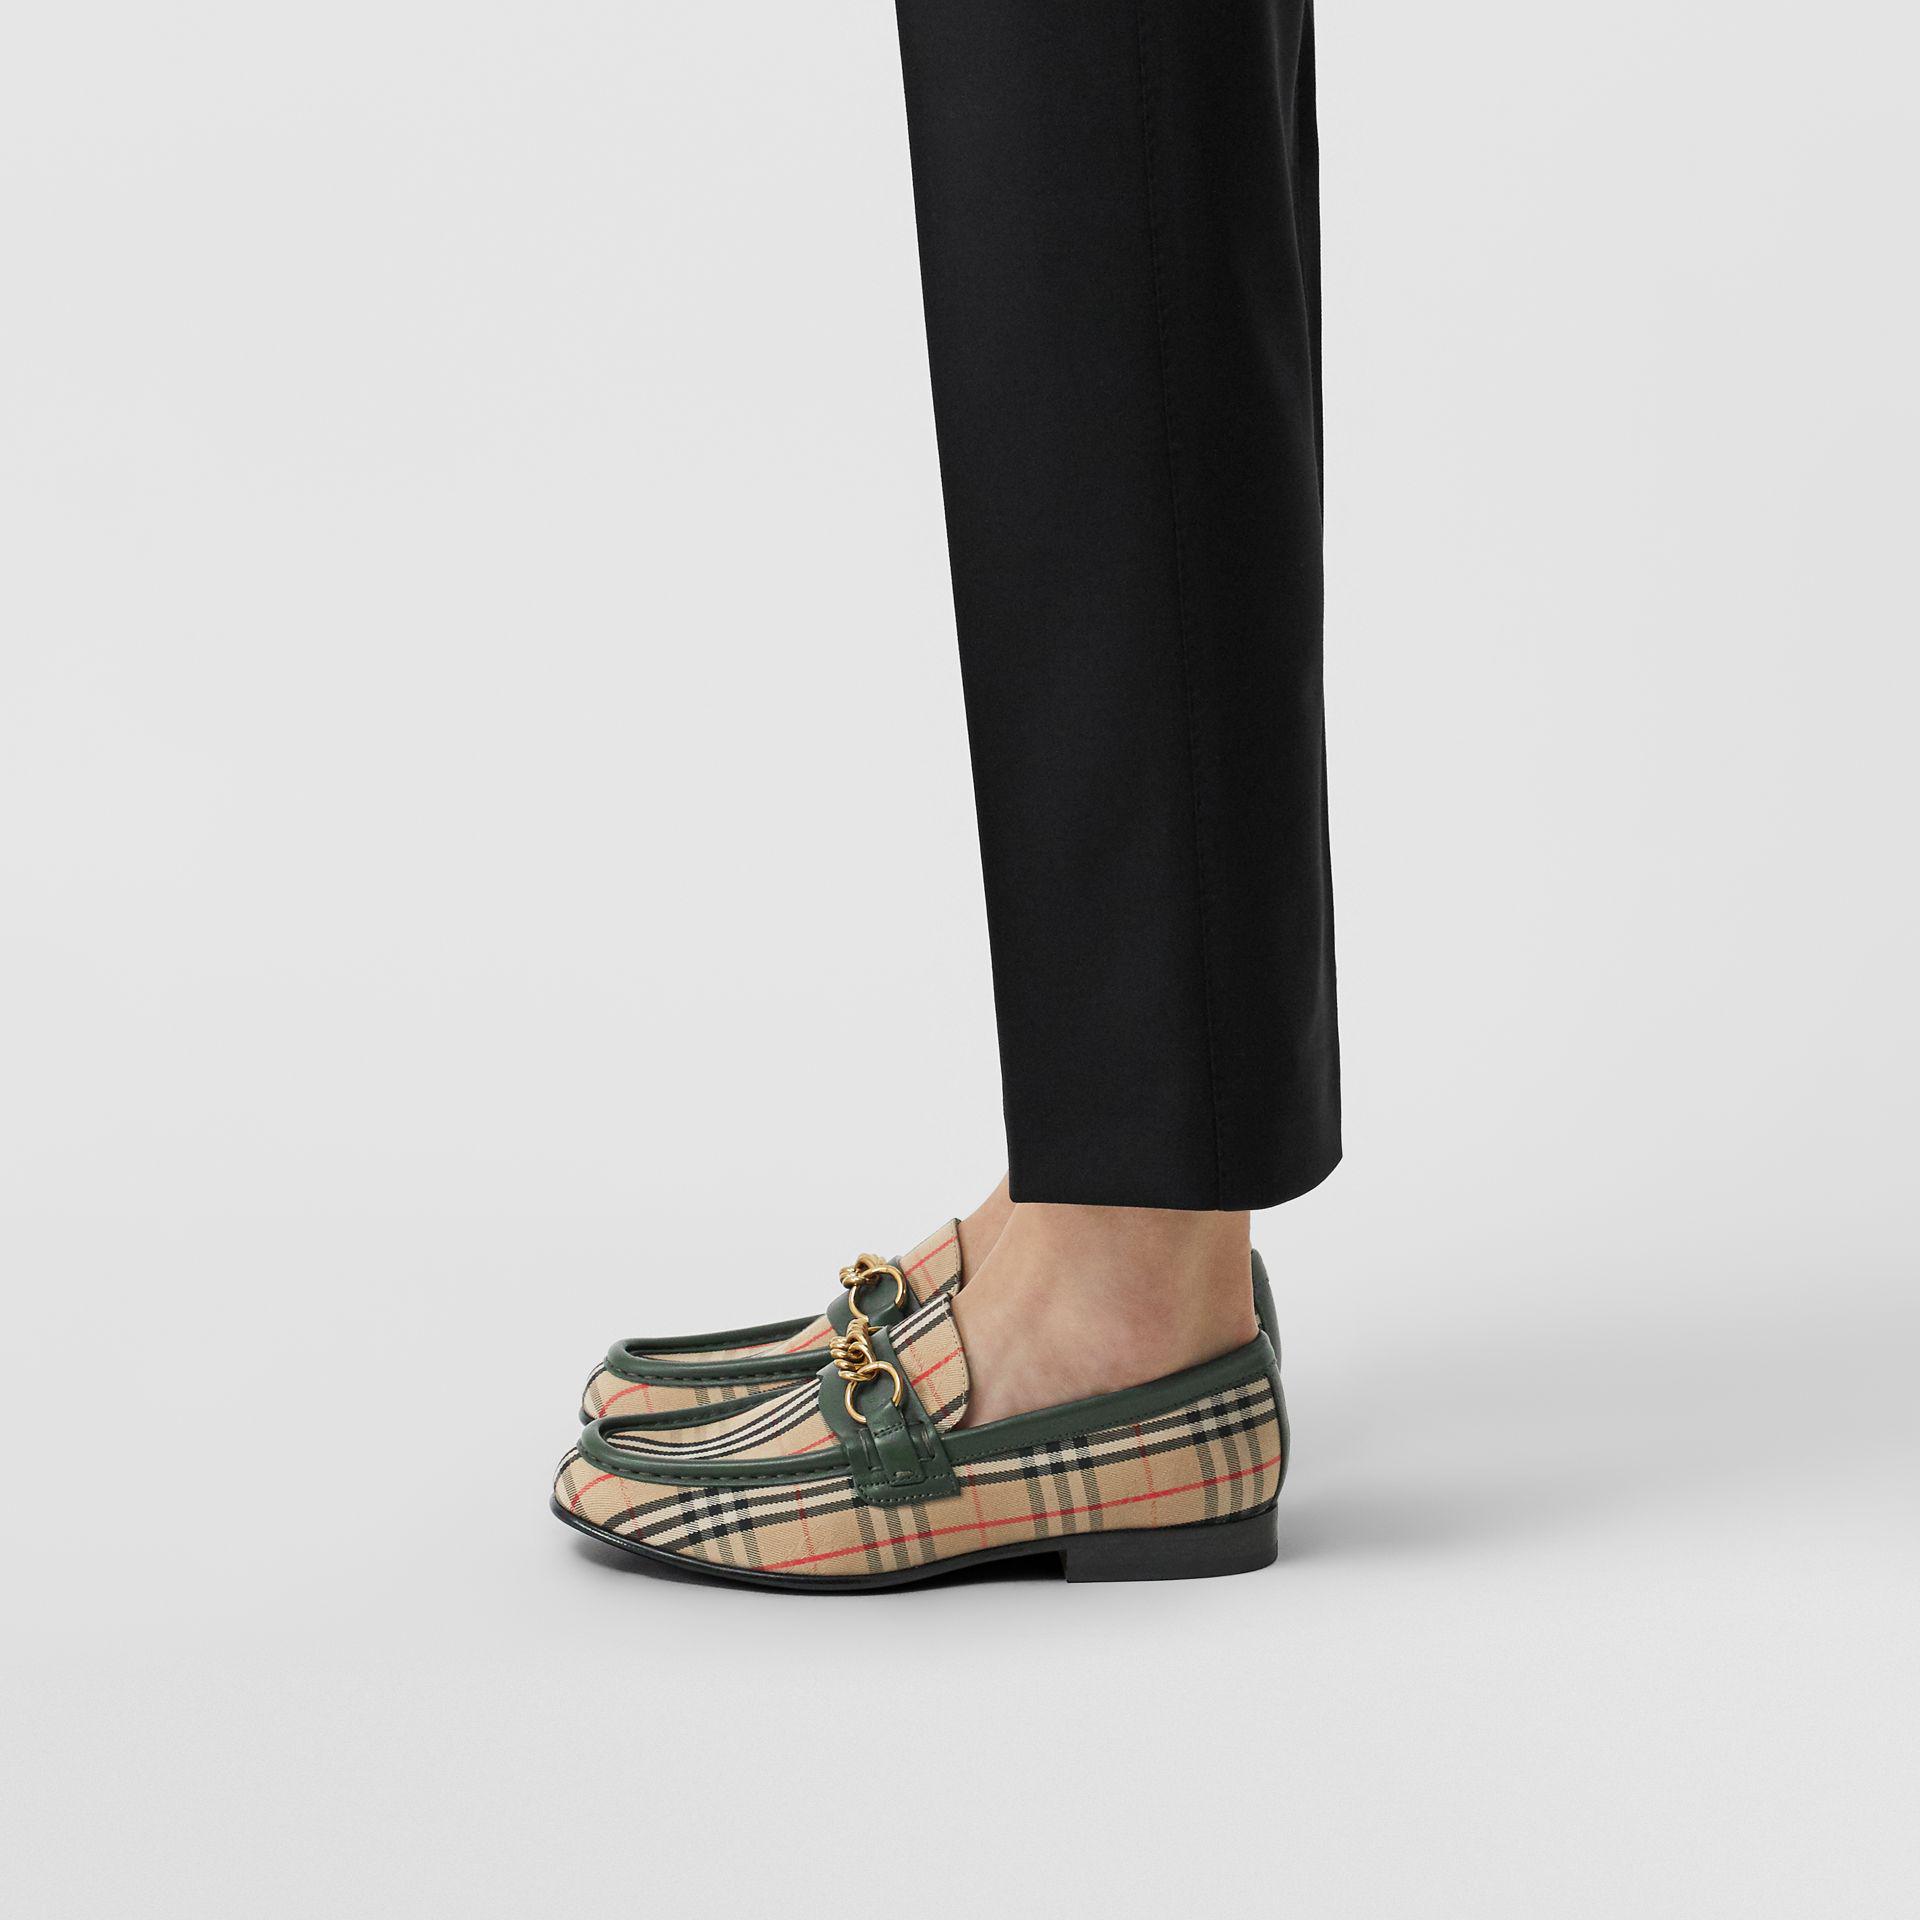 Burberry The 1983 Check Link Loafer in 